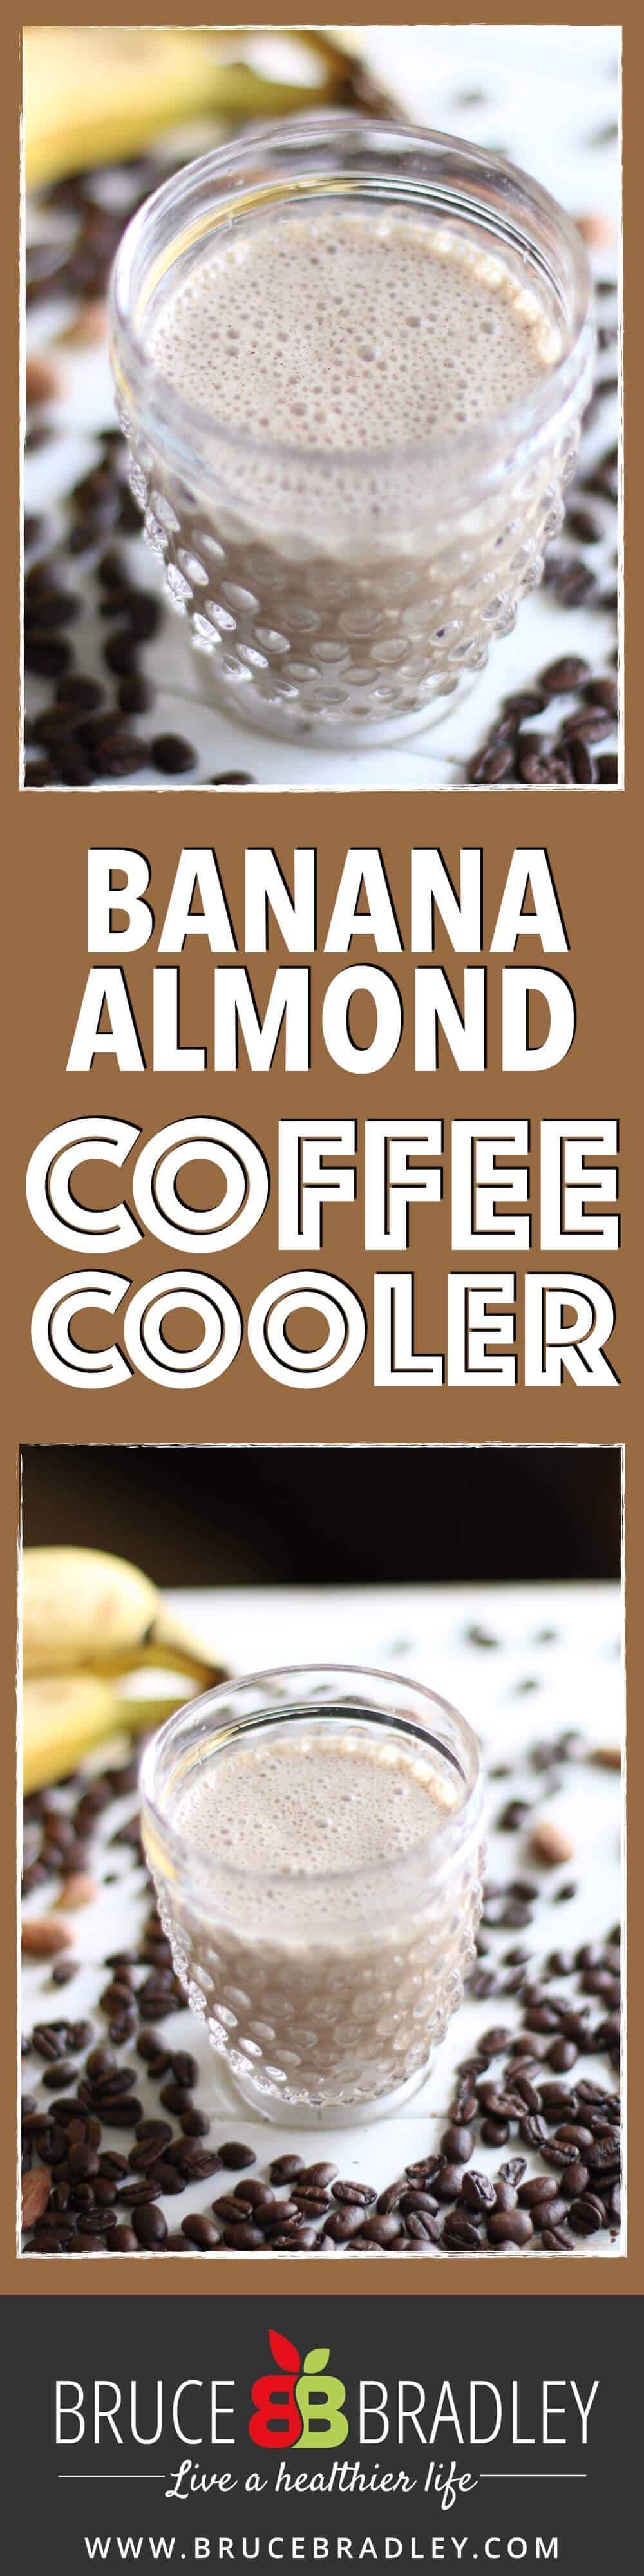 This Banana Almond Coffee Cooler Is The Perfect Summer Drink To Cool You Down, And It'S Made With Real Ingredients And No Added Sugars!